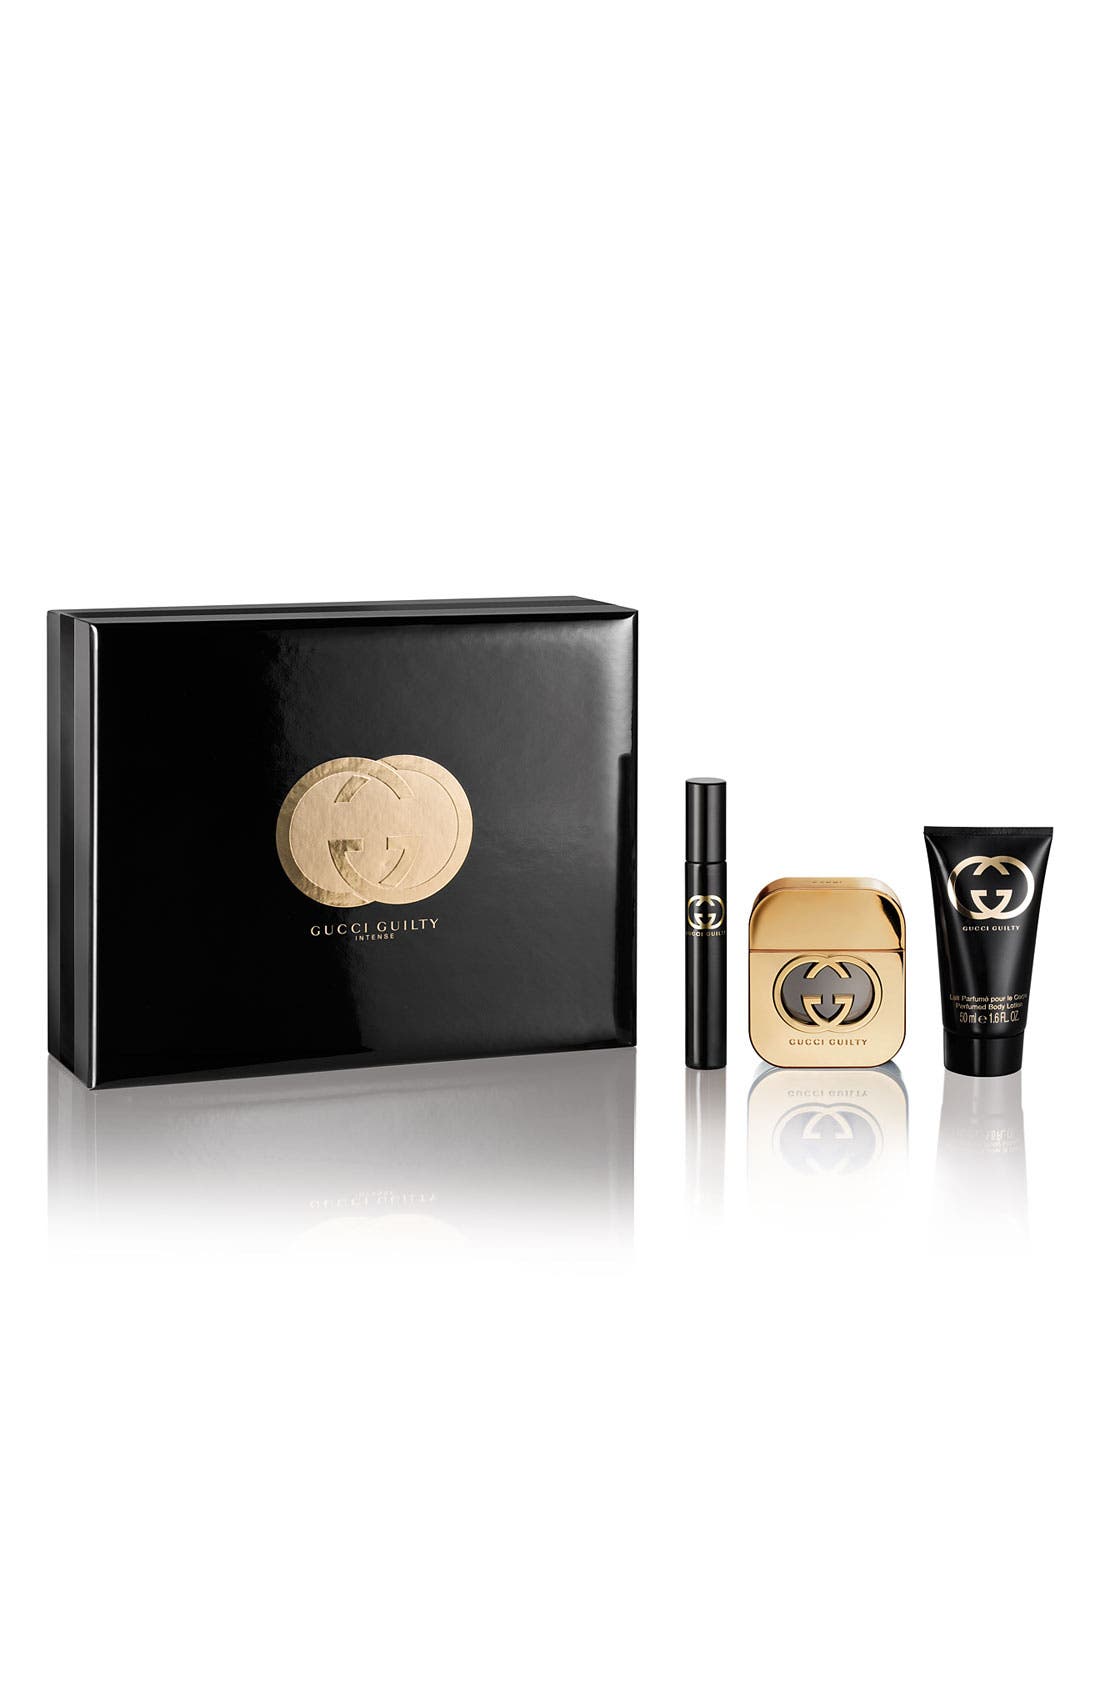 Gucci 'Guilty' Fragrance Gift Set ($141 